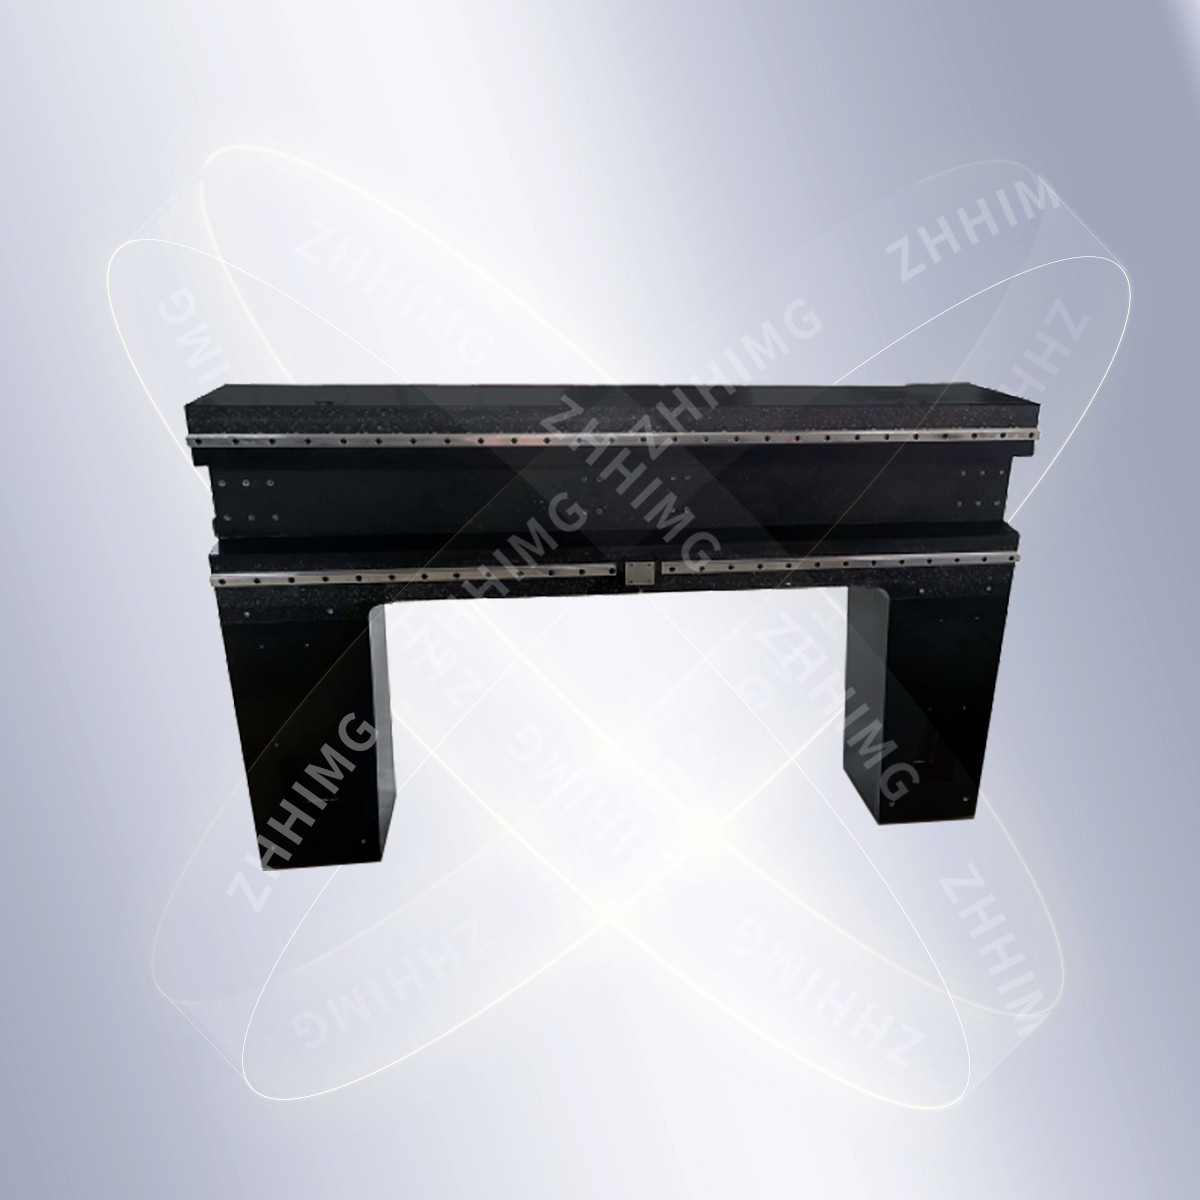 Hot-selling Granite For Precision Linear Axis - Mineral Casting Machine Bed – ZHONGHUI